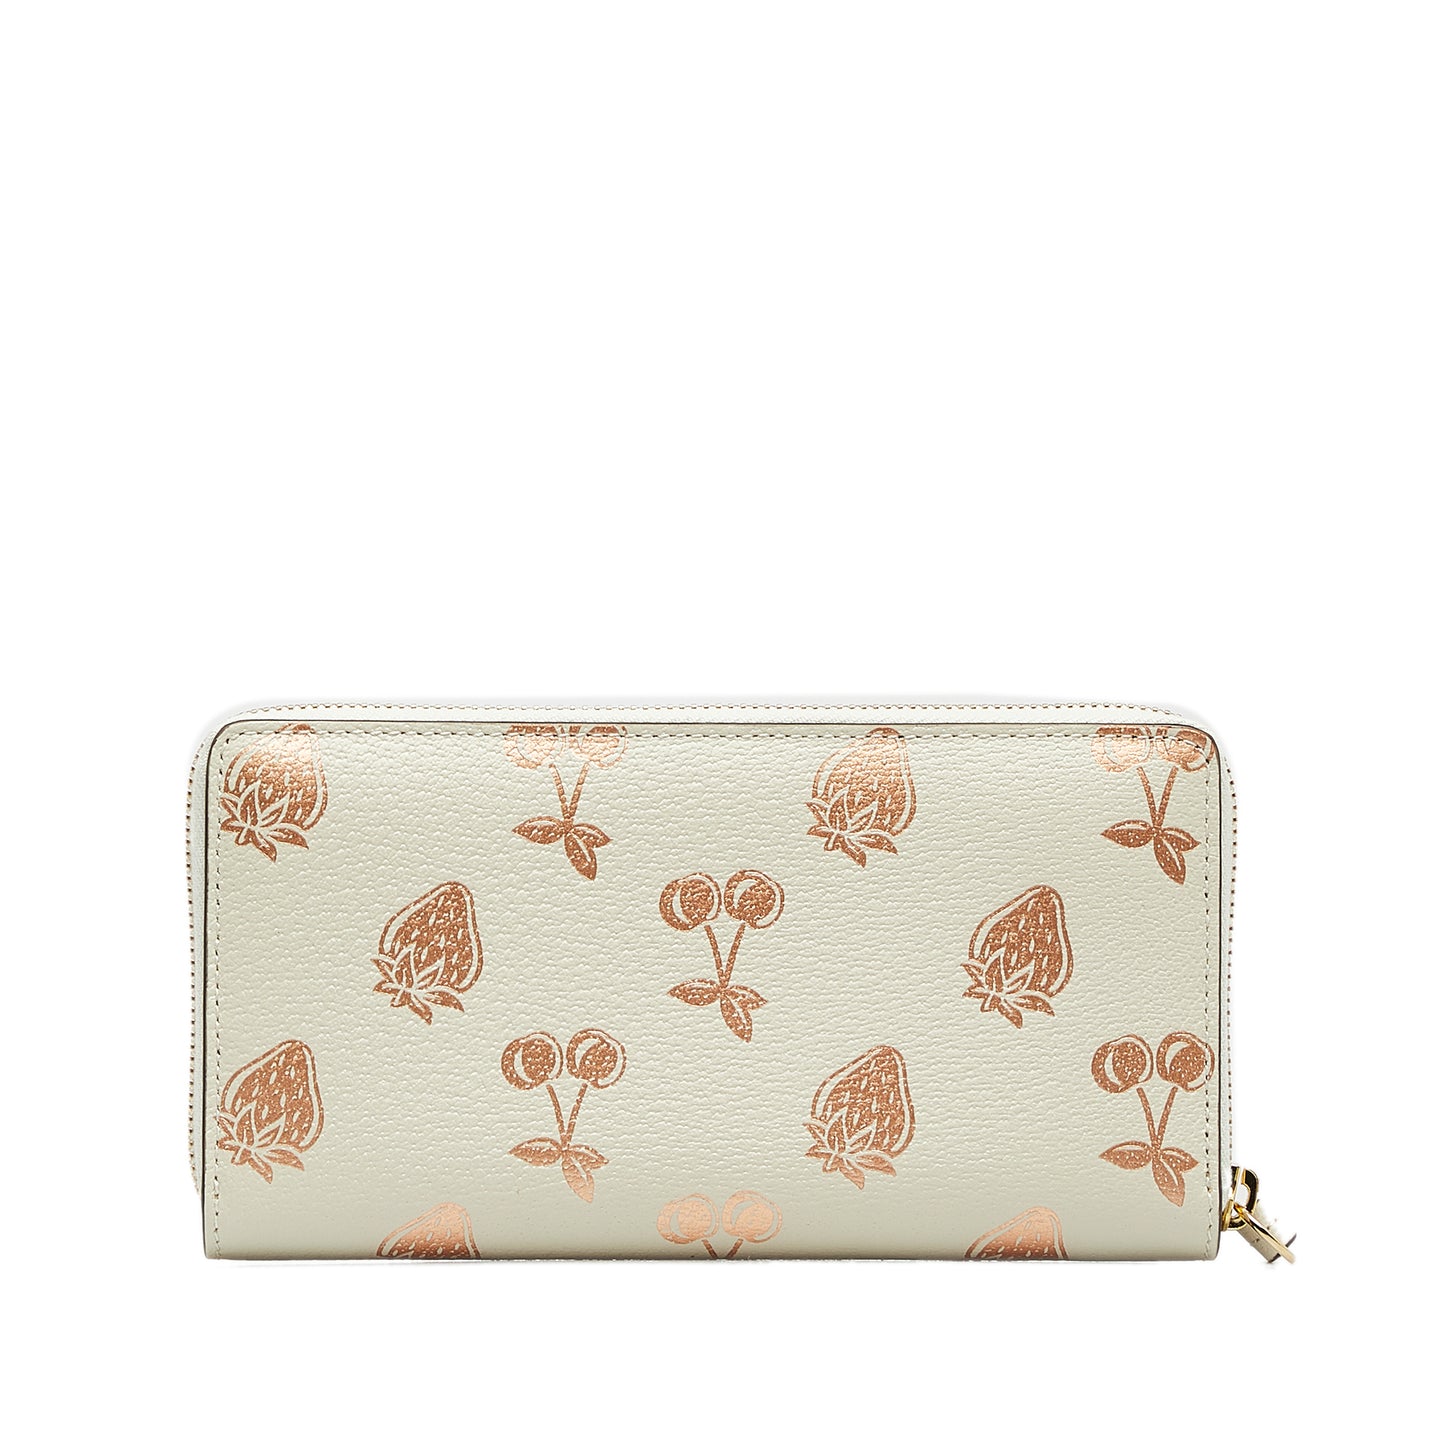 Berry Marmont Leather Wallet White - Gaby Paris